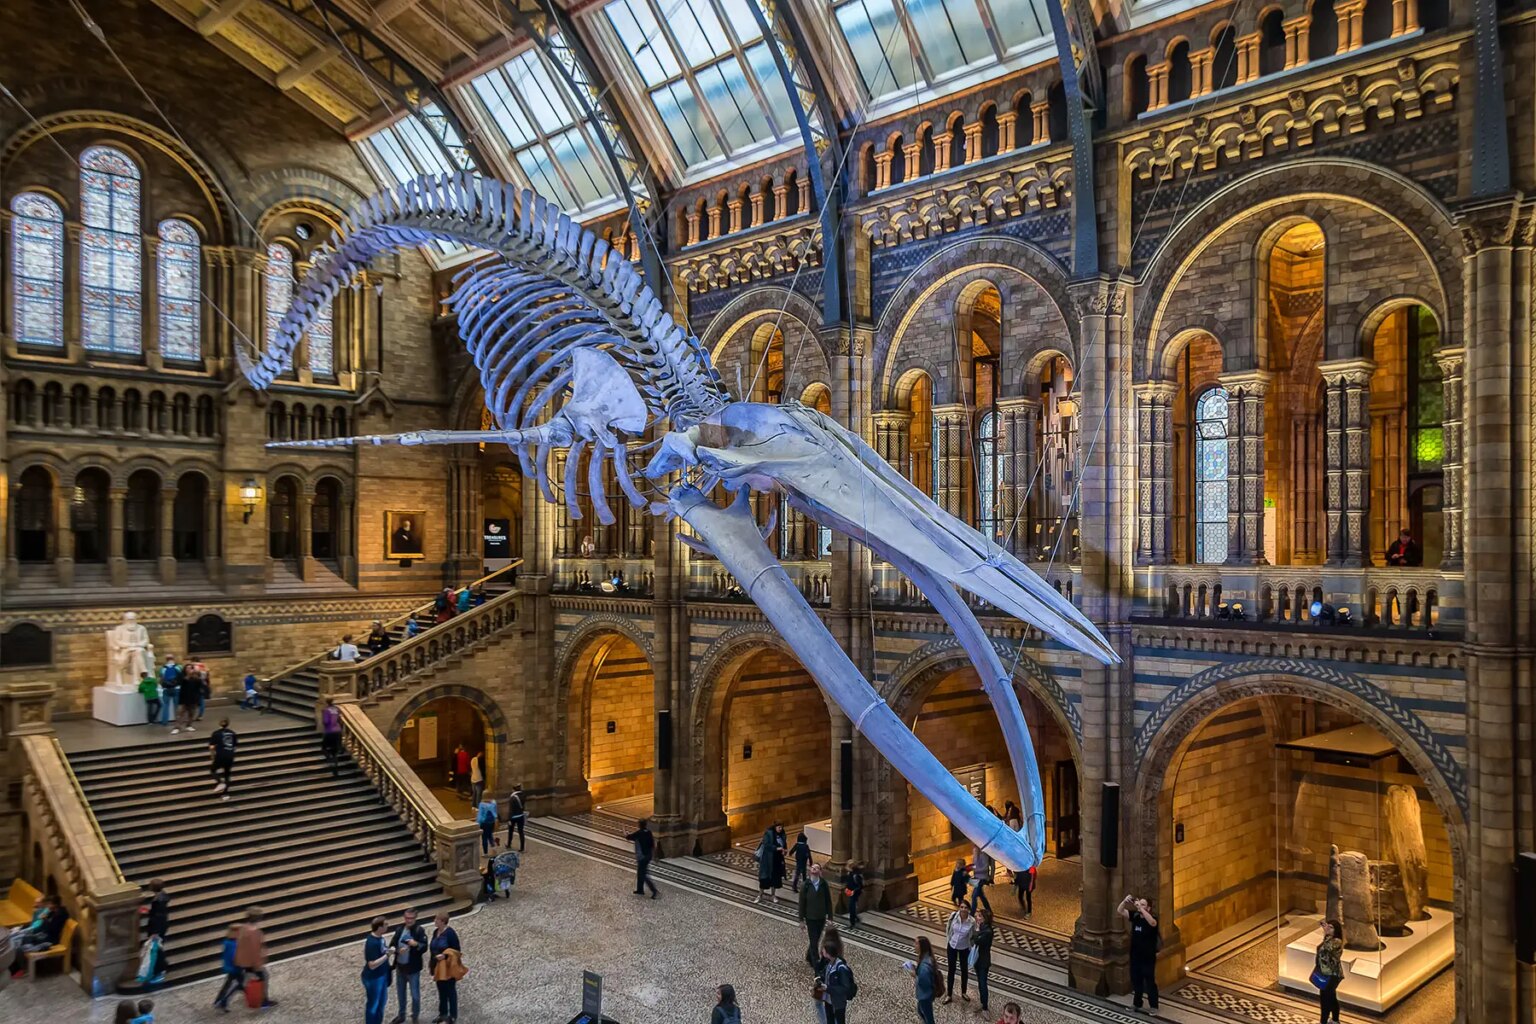 Museums in London